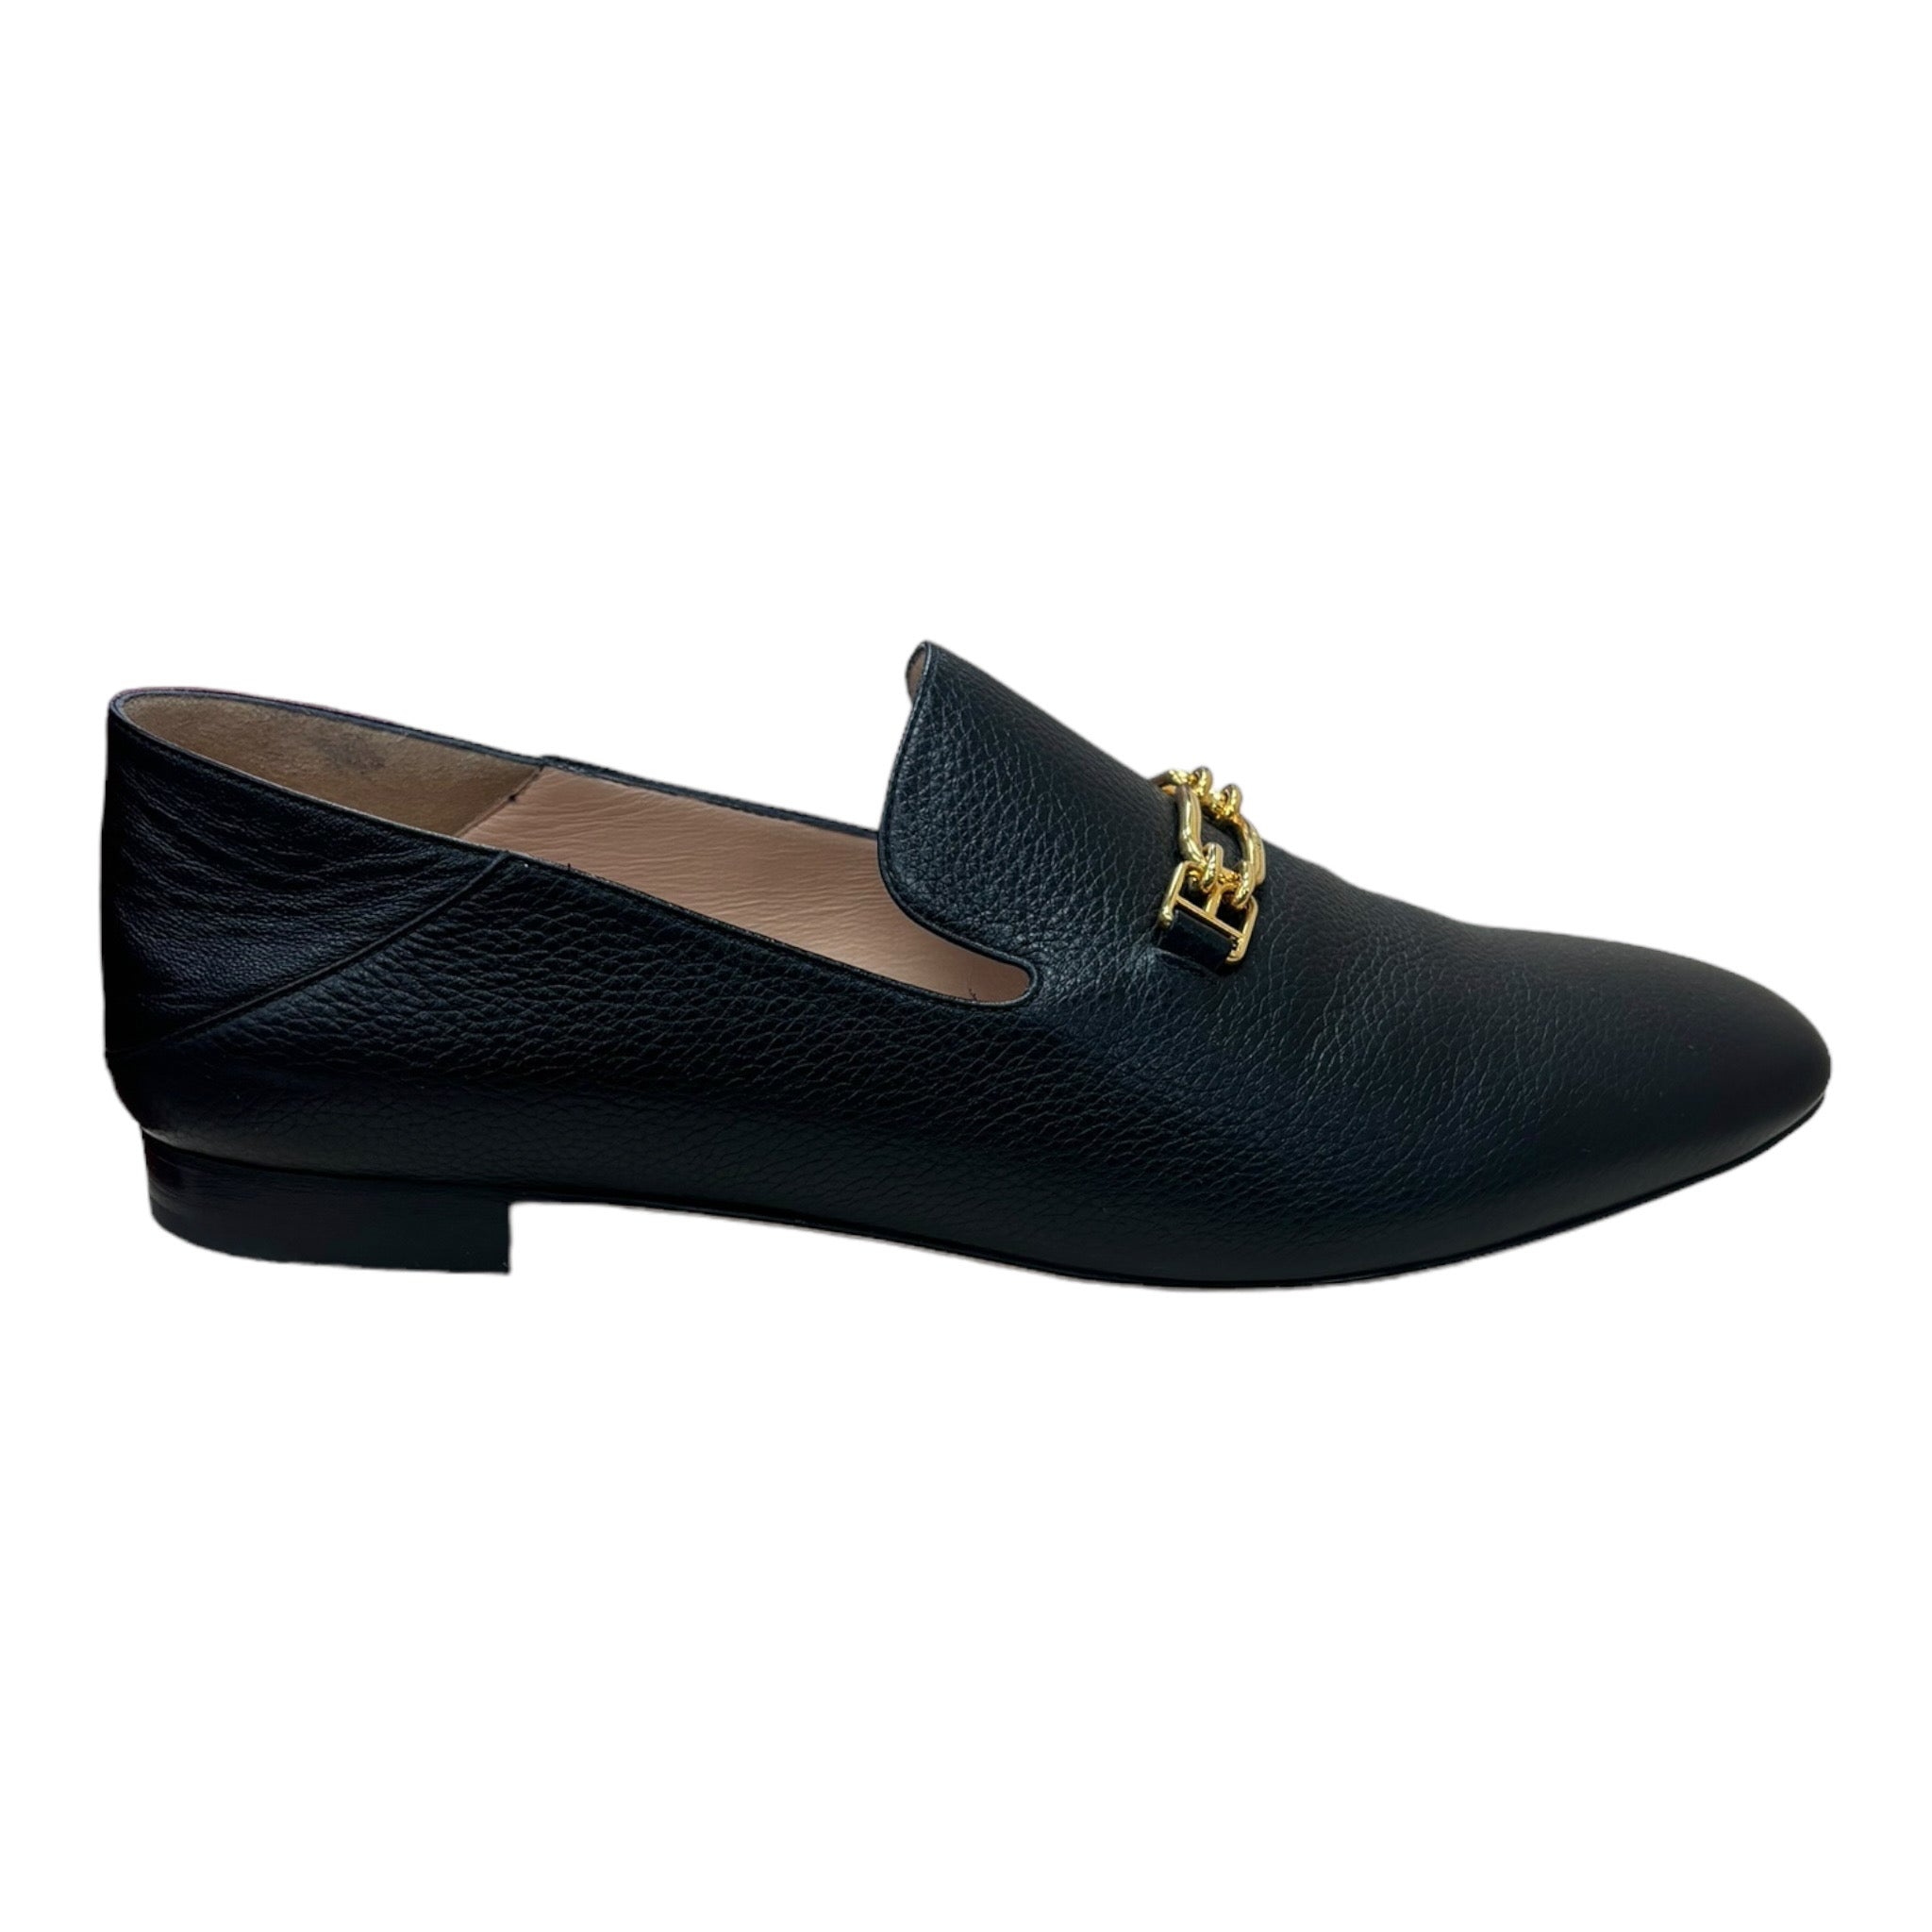 BALLY DARCIE FLAT BLACK GRAINED WOMENS SHOES